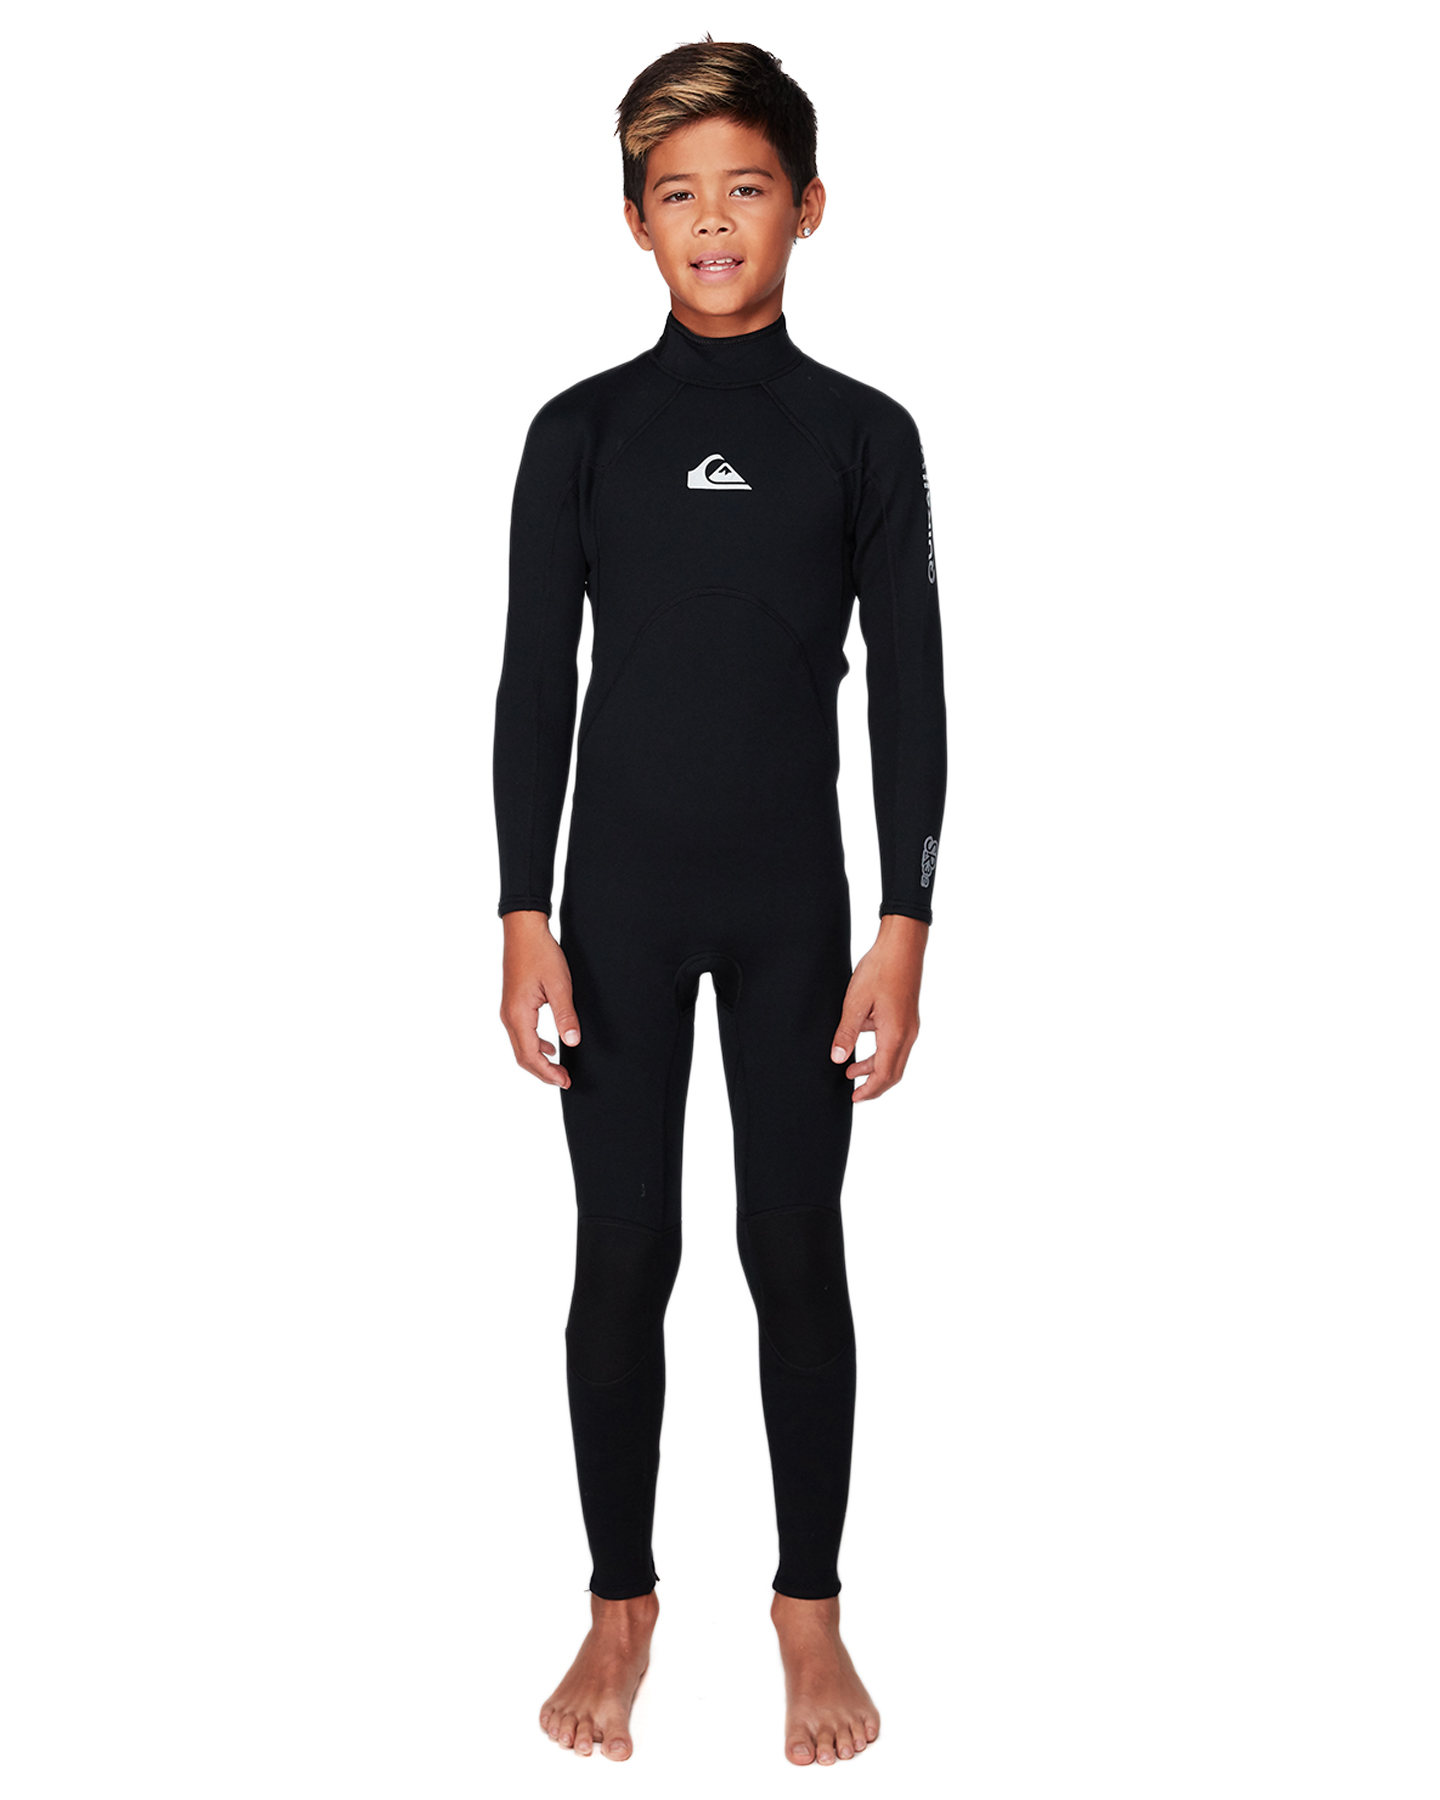 Quiksilver Youth Wetsuit Size Chart